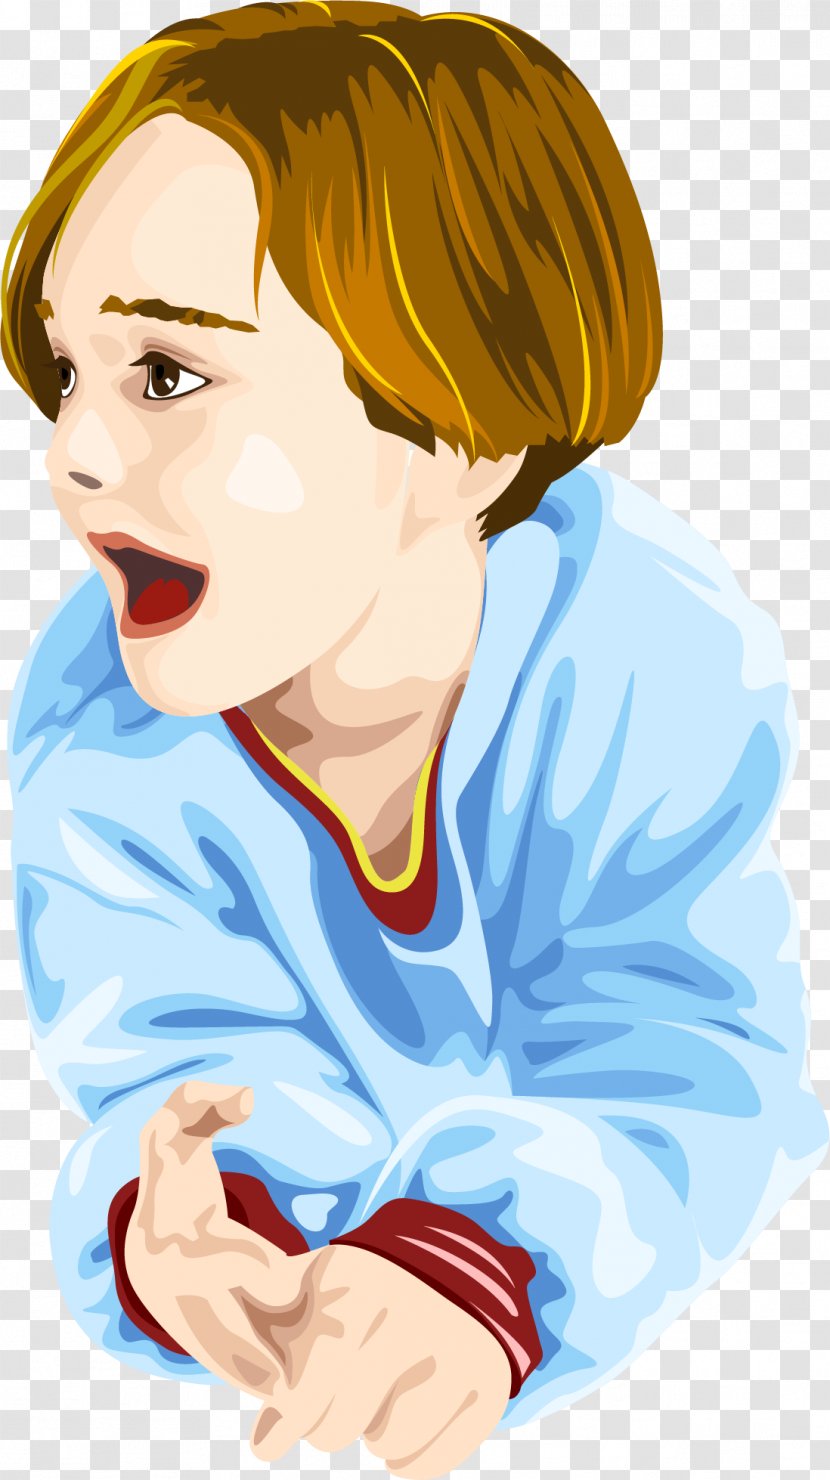 Lollipop Rock Candy Eating Sugar - Heart - Vector Hand-painted Shouting Child Transparent PNG